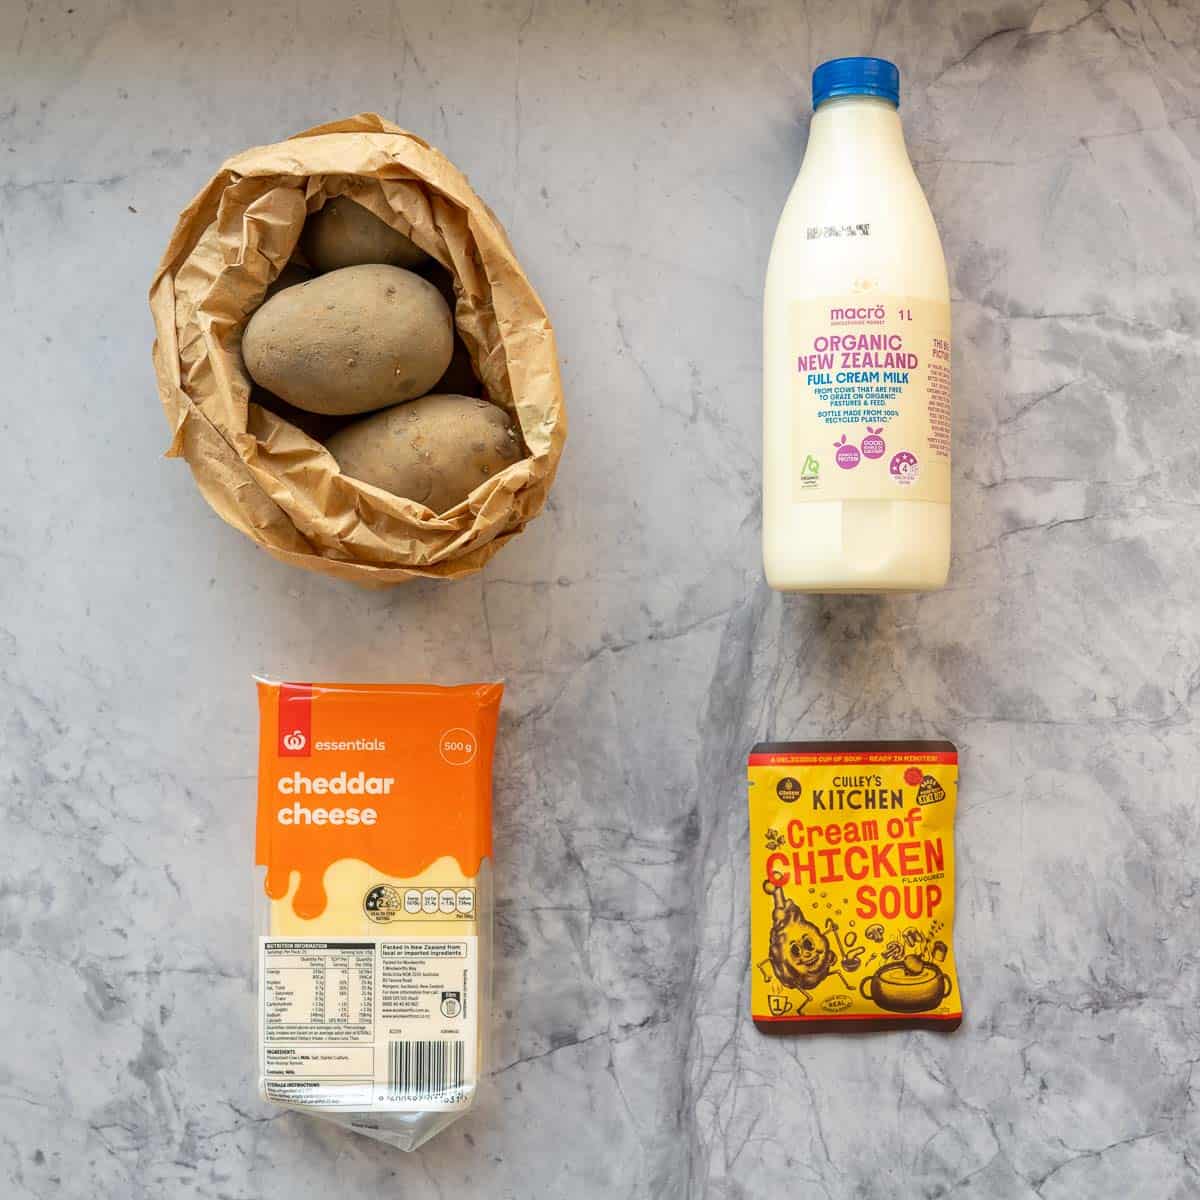 A brown paper bag of potatoes, bottle of milk, block of cheese and a packet of soup mix laid out on a bench top.